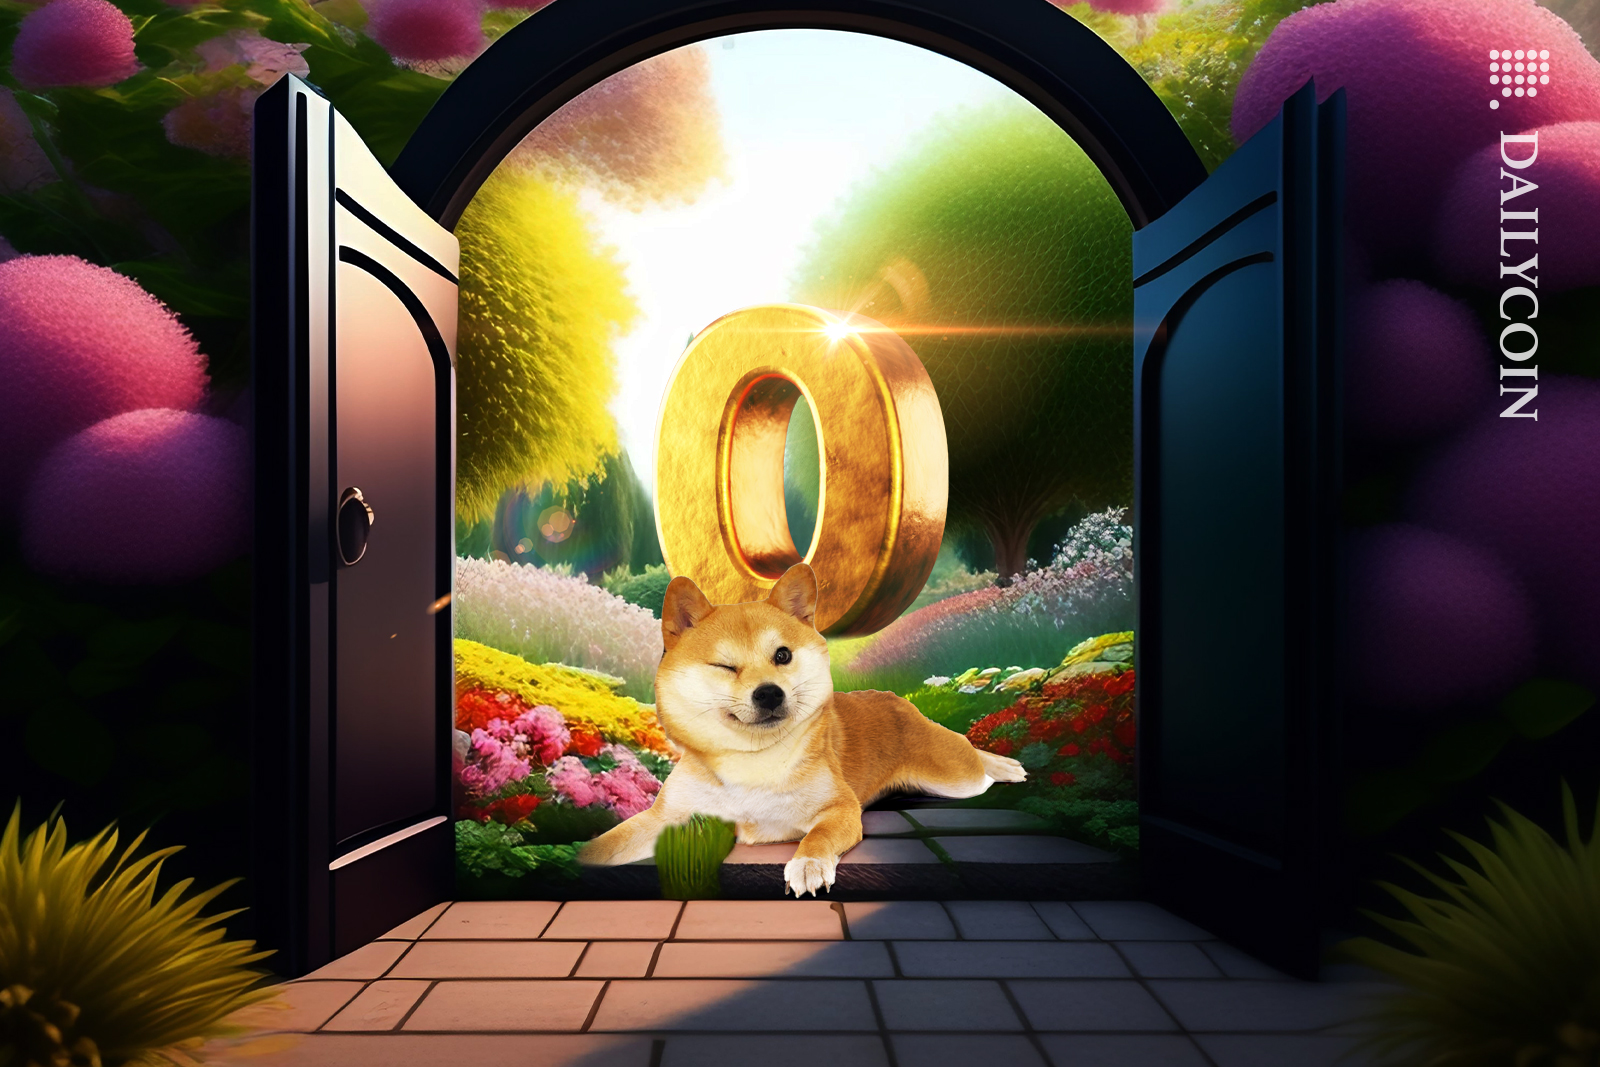 Winking Shiba Inu laying at a garden entrance door in front of a gold zero.